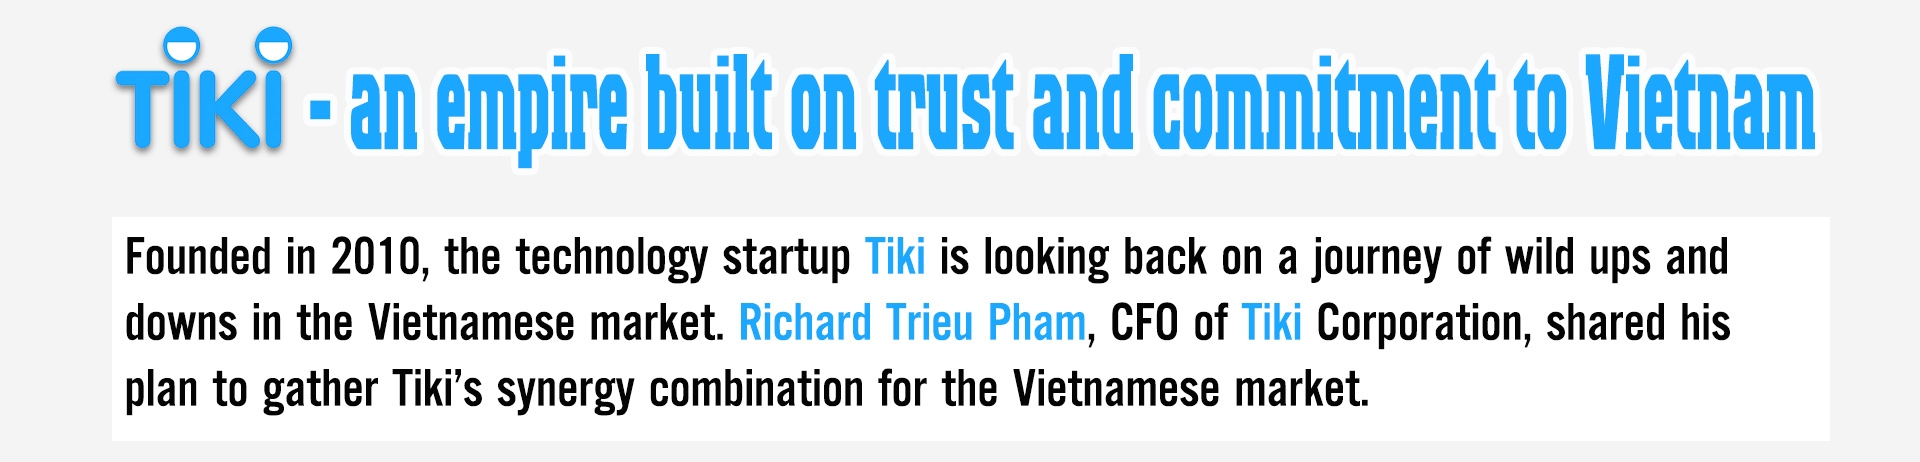 tiki an empire built on trust and commitment to vietnam e magazine